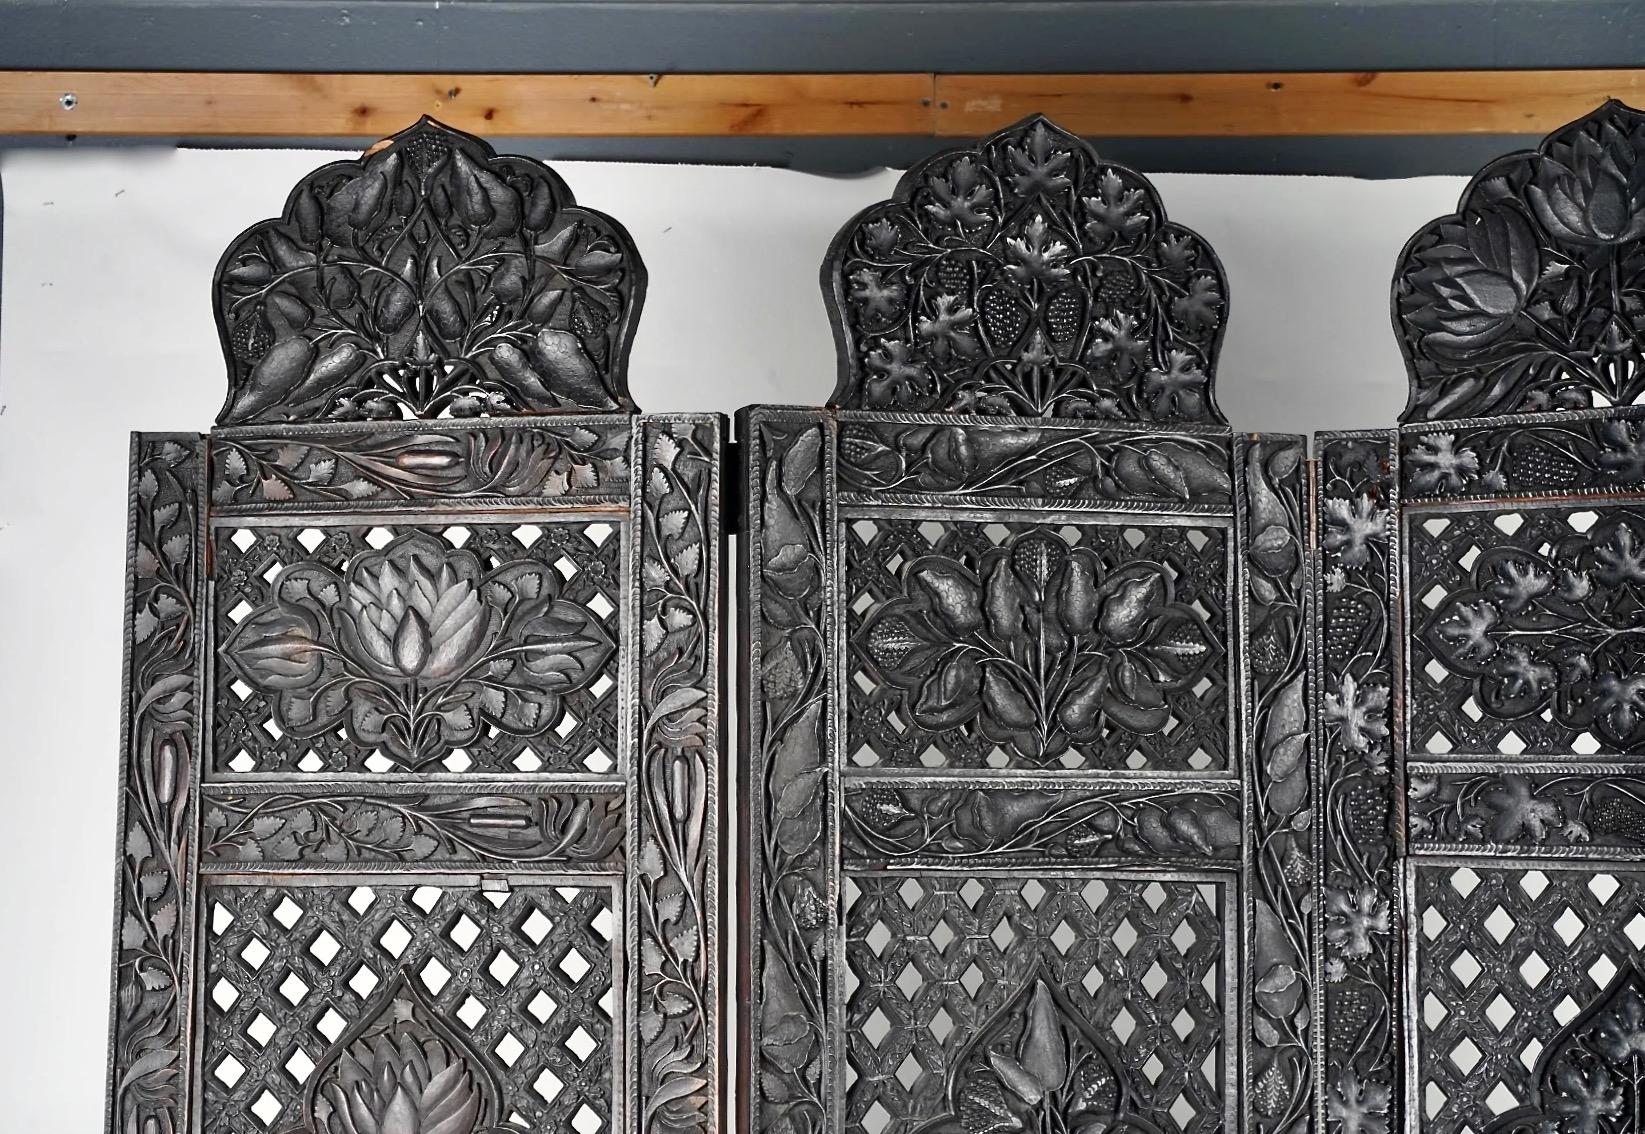 This is a finely carved late 19th century Indian Anglo-Raj Hardwood Screen that was fabricated for the export market. The four-panel screen features four distinctly carved floral panels to the front and four matching panels of dragons, florals and